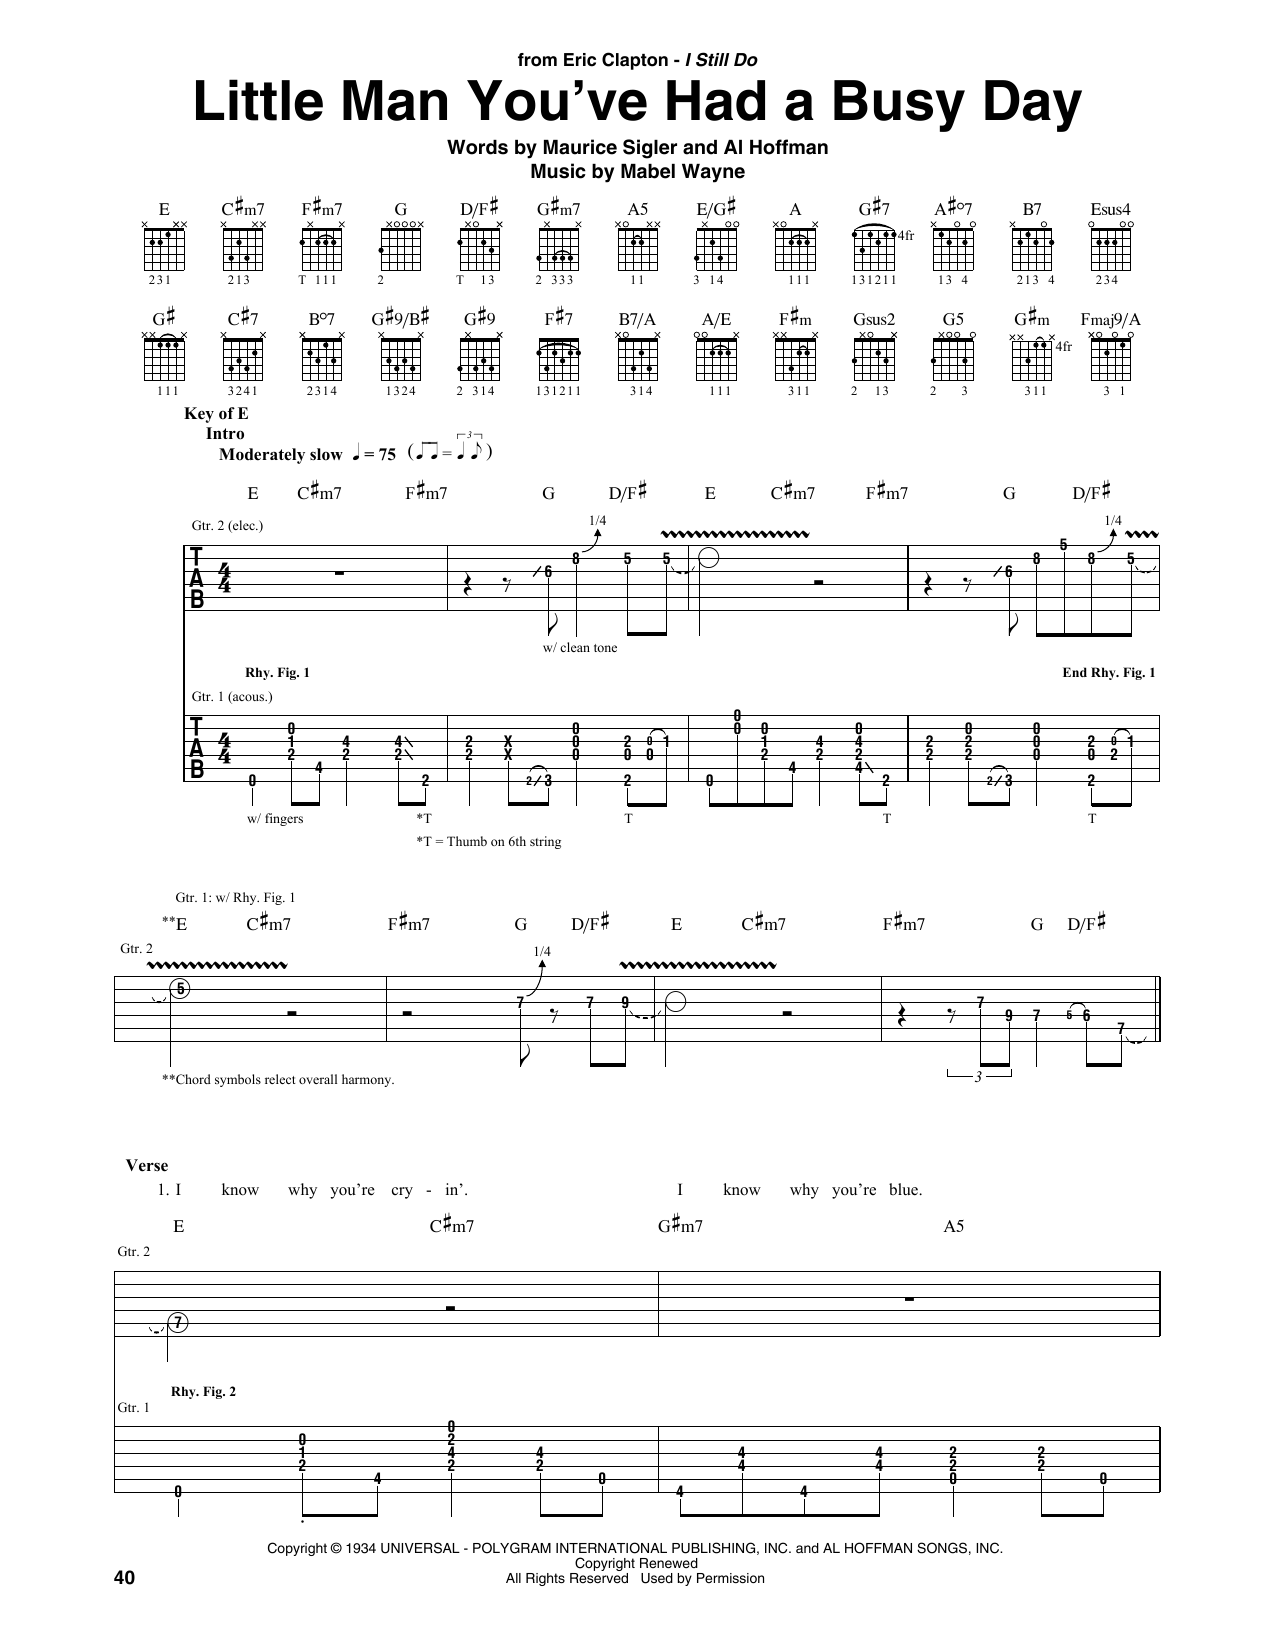 Download Eric Clapton Little Man You've Had A Busy Day Sheet Music